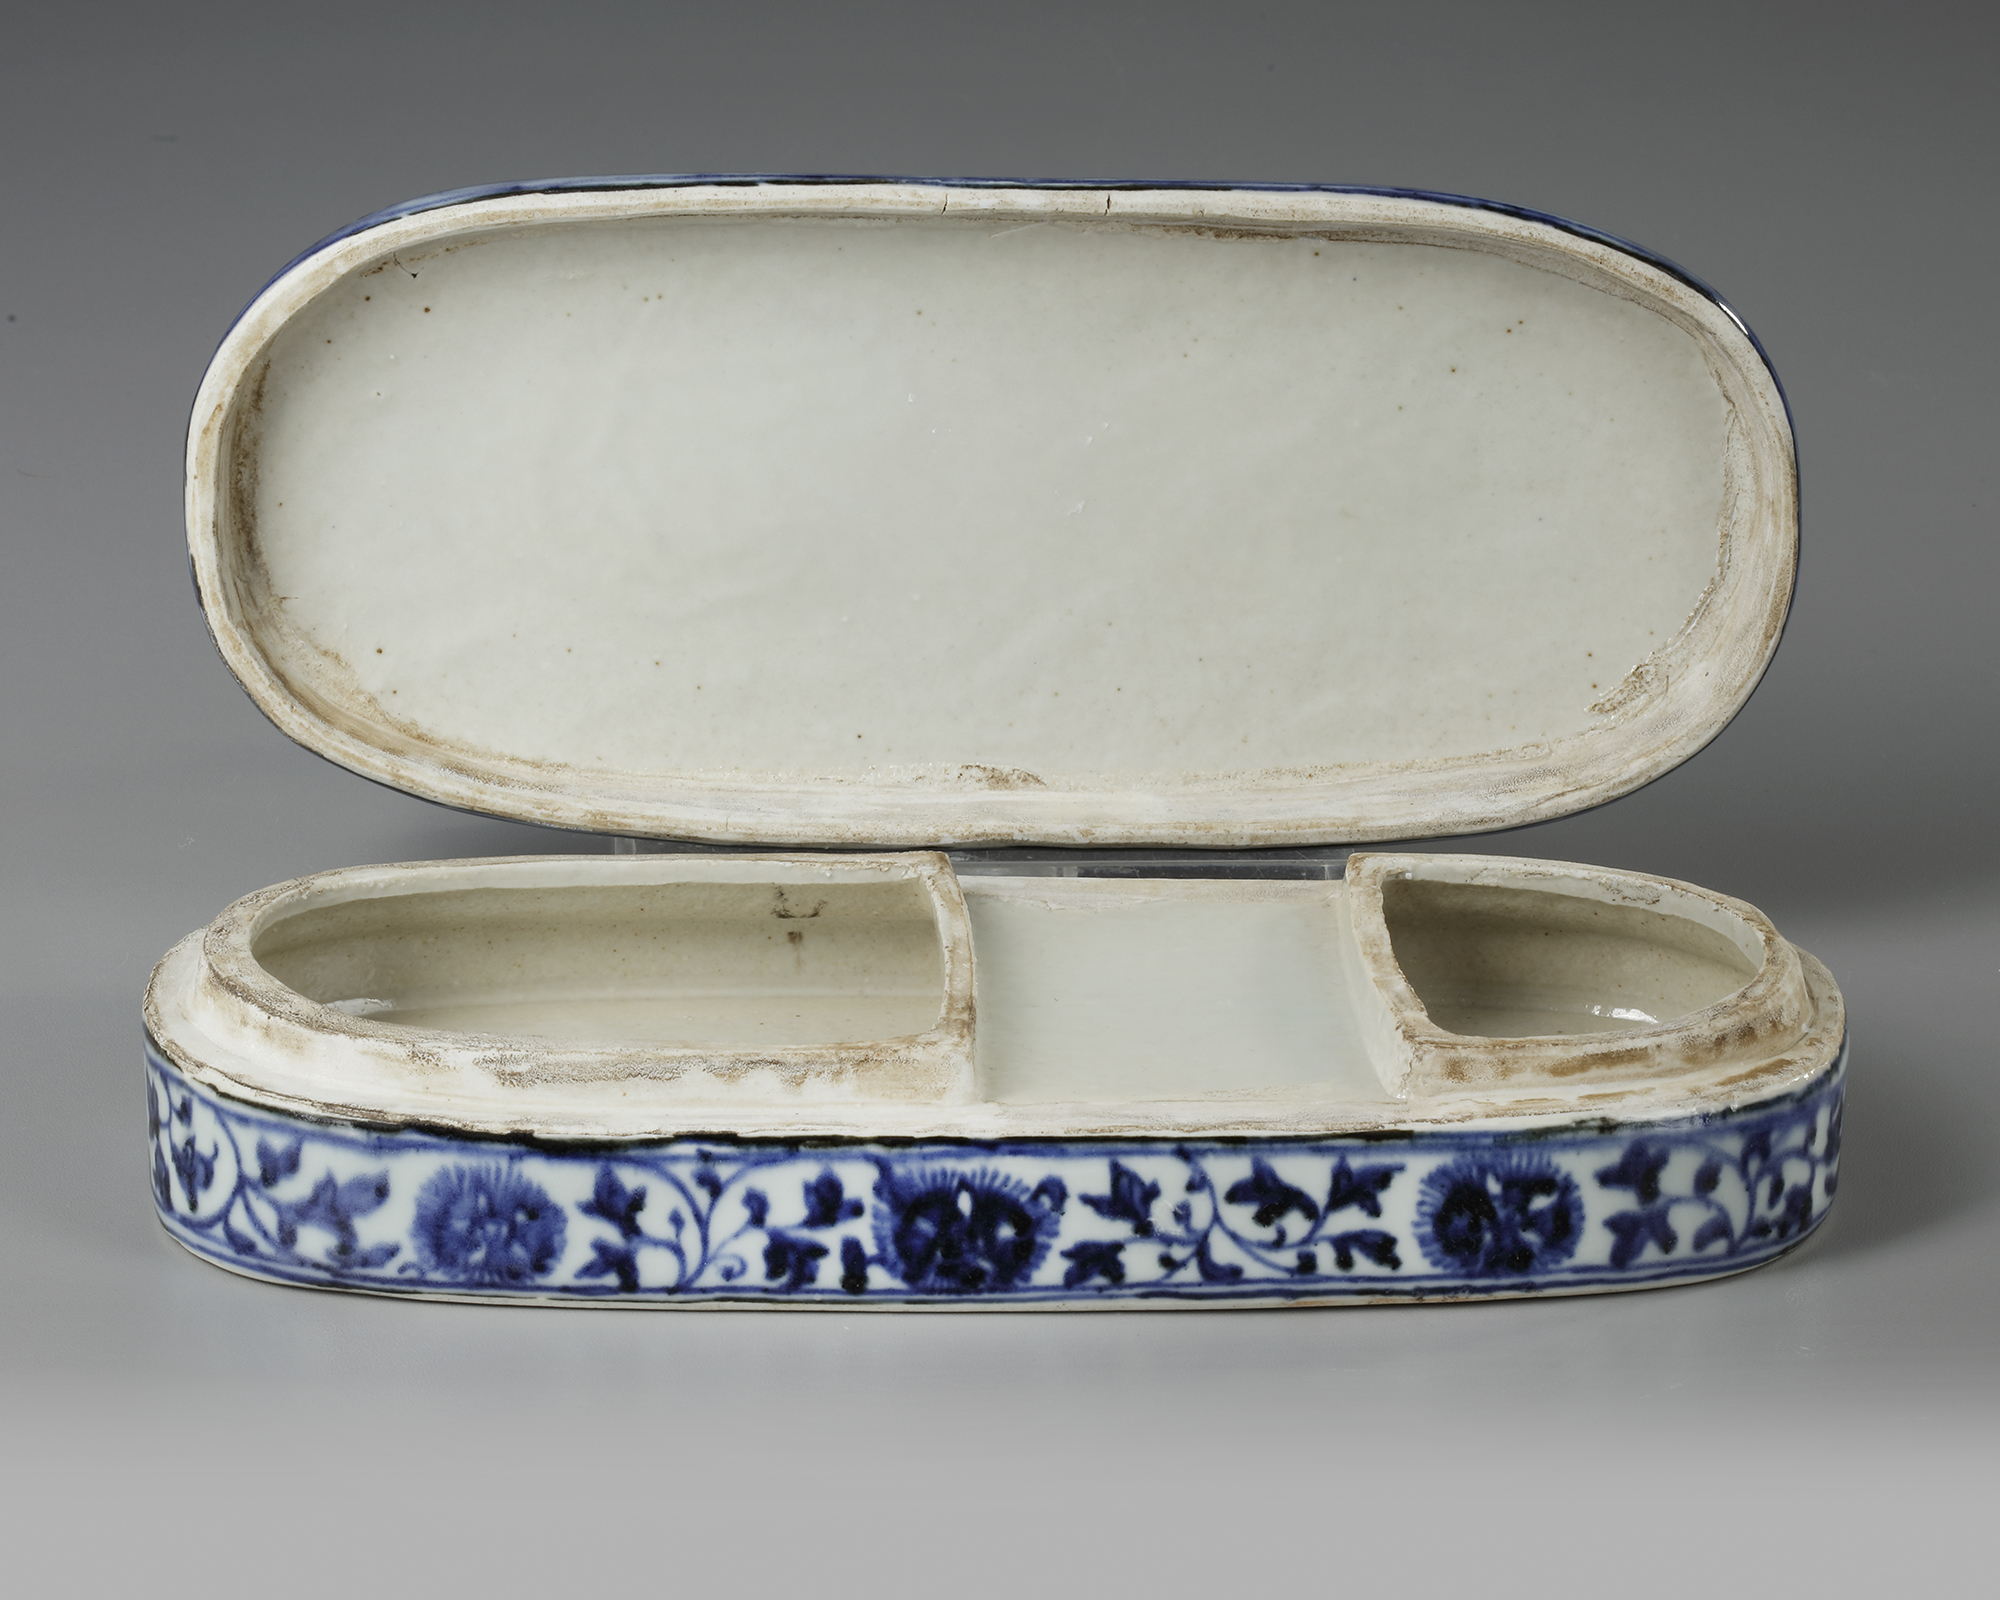 A CHINESE BLUE AND WHITE PEN BOX FOR THE ISLAMIC MARKET, QING DYNASTY (1644-1911) - Image 4 of 5